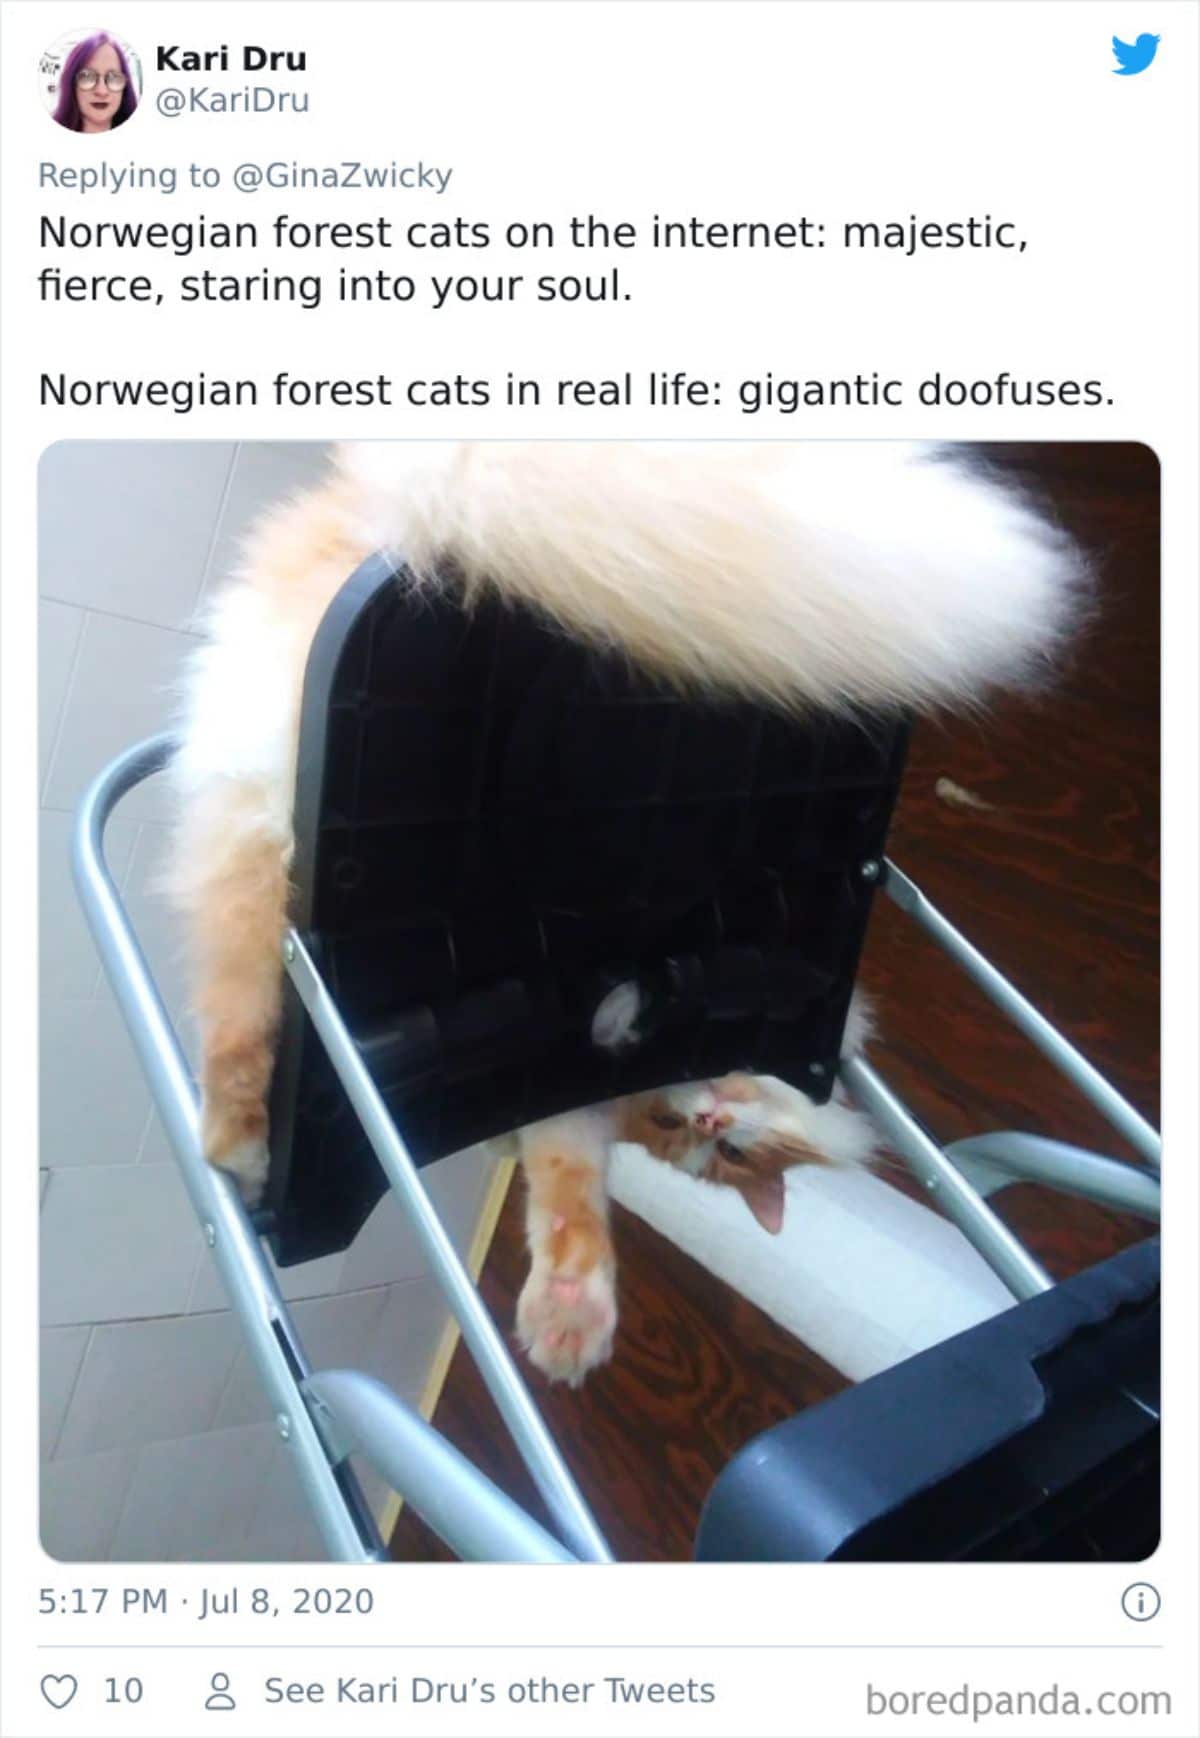 tweet of a photo of an orange and white fluffy cat sitting on a metal chair peeking down